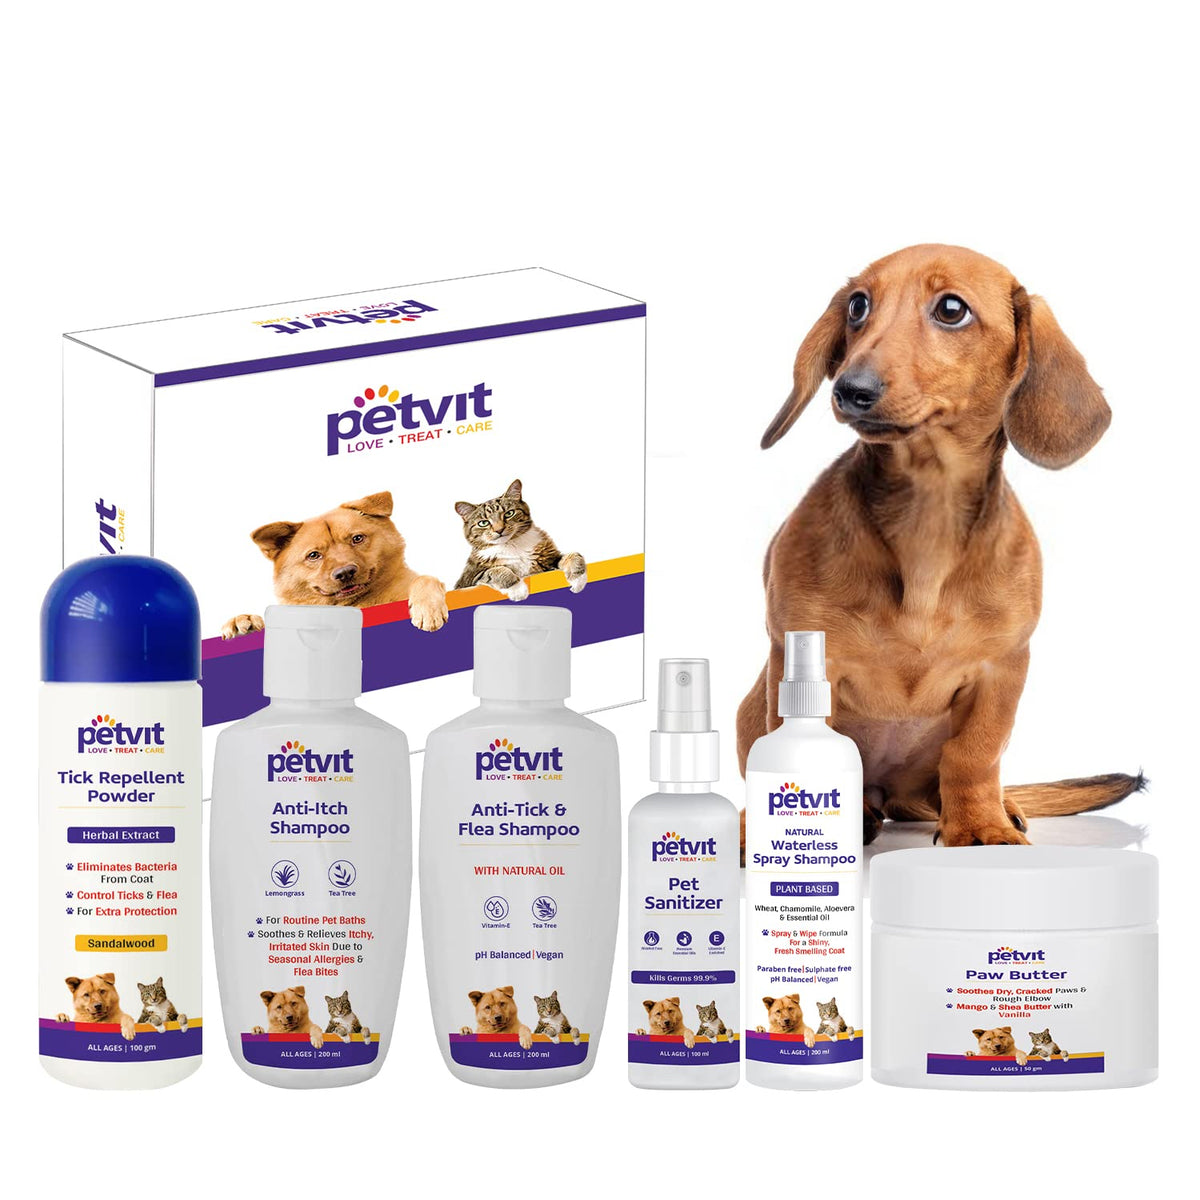 Petvit Dachshund Grooming Combo 6 in 1 from Head to Tail for Your Dog Natural Waterless Shampoo + Anti-Itch Shampoo + Paw Butter + Anti-Tick & flea Shampoo + Pet Sanitizer + Tick Repellent Powder